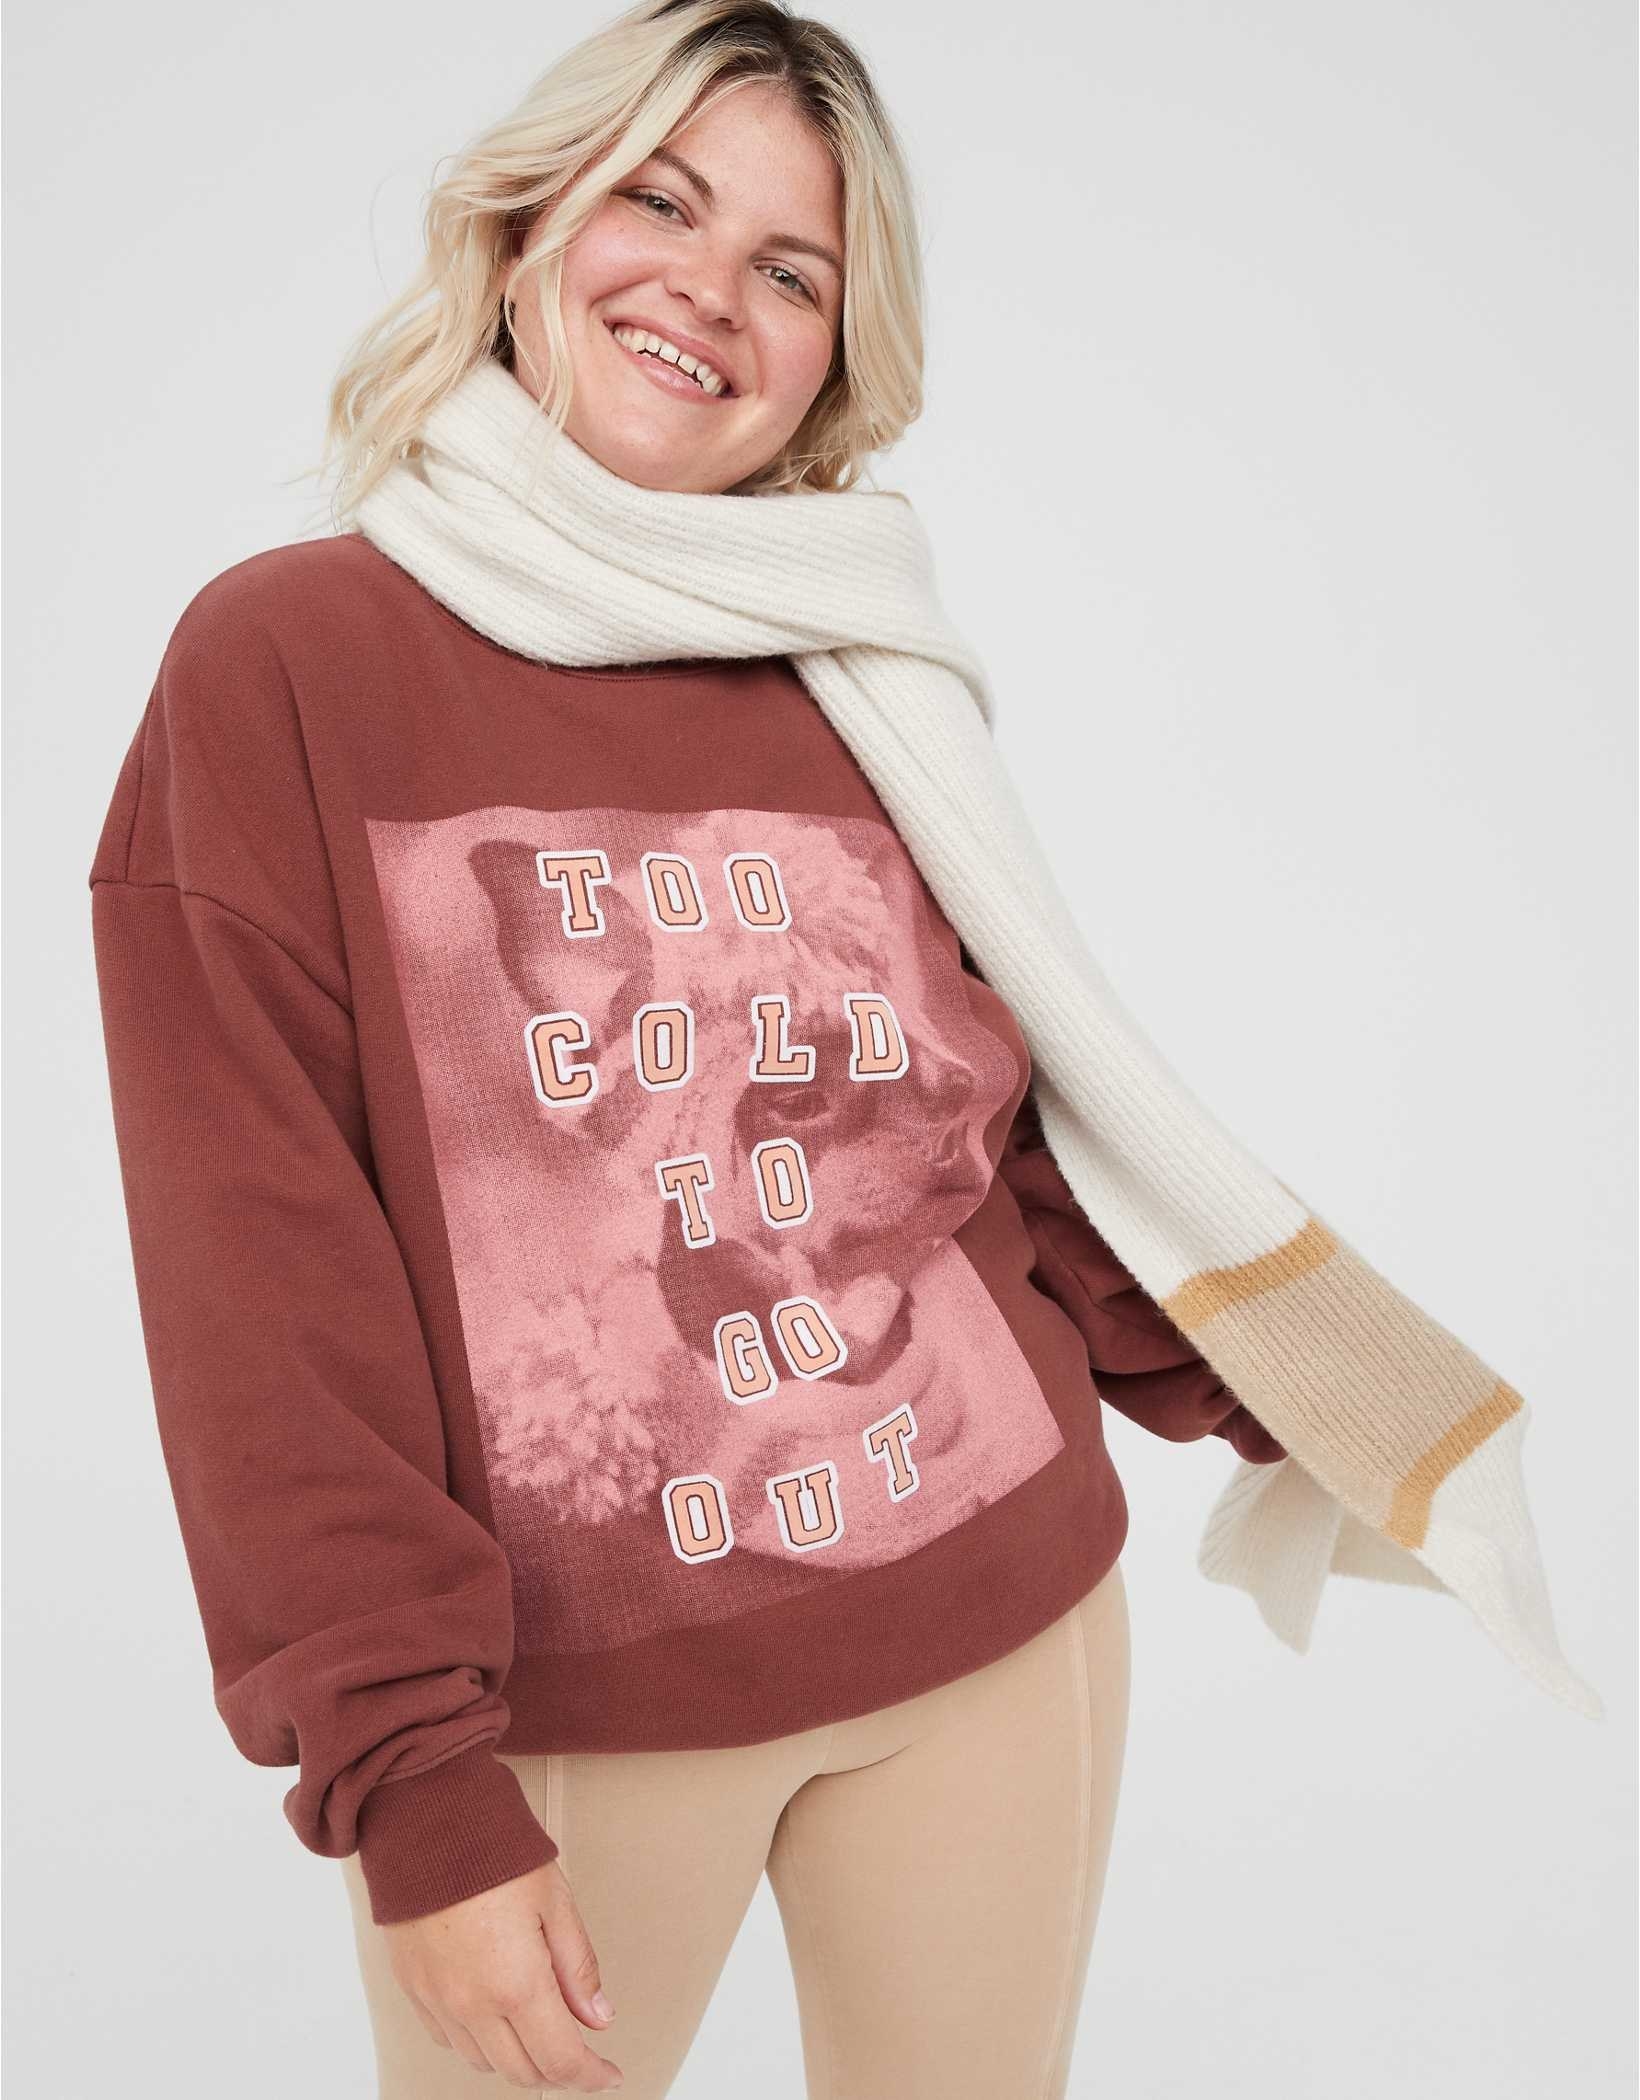 model wearing maroon sweatshirt with a picture of a dog wearing a hat and scarf and the words &quot;Too cold to go out&quot; printed over the image